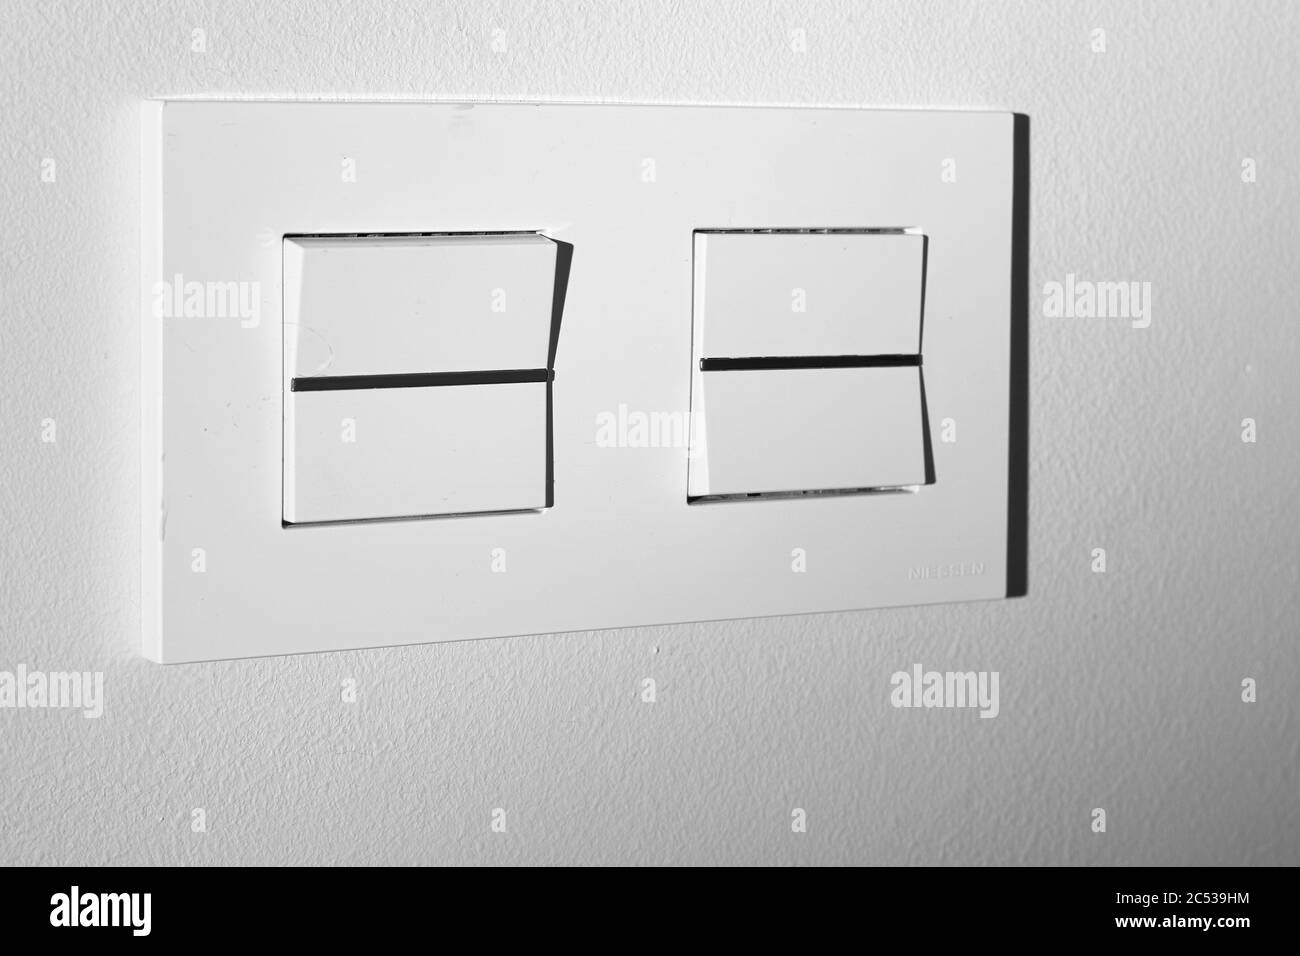 Light switch with two button on white background. Stock Photo